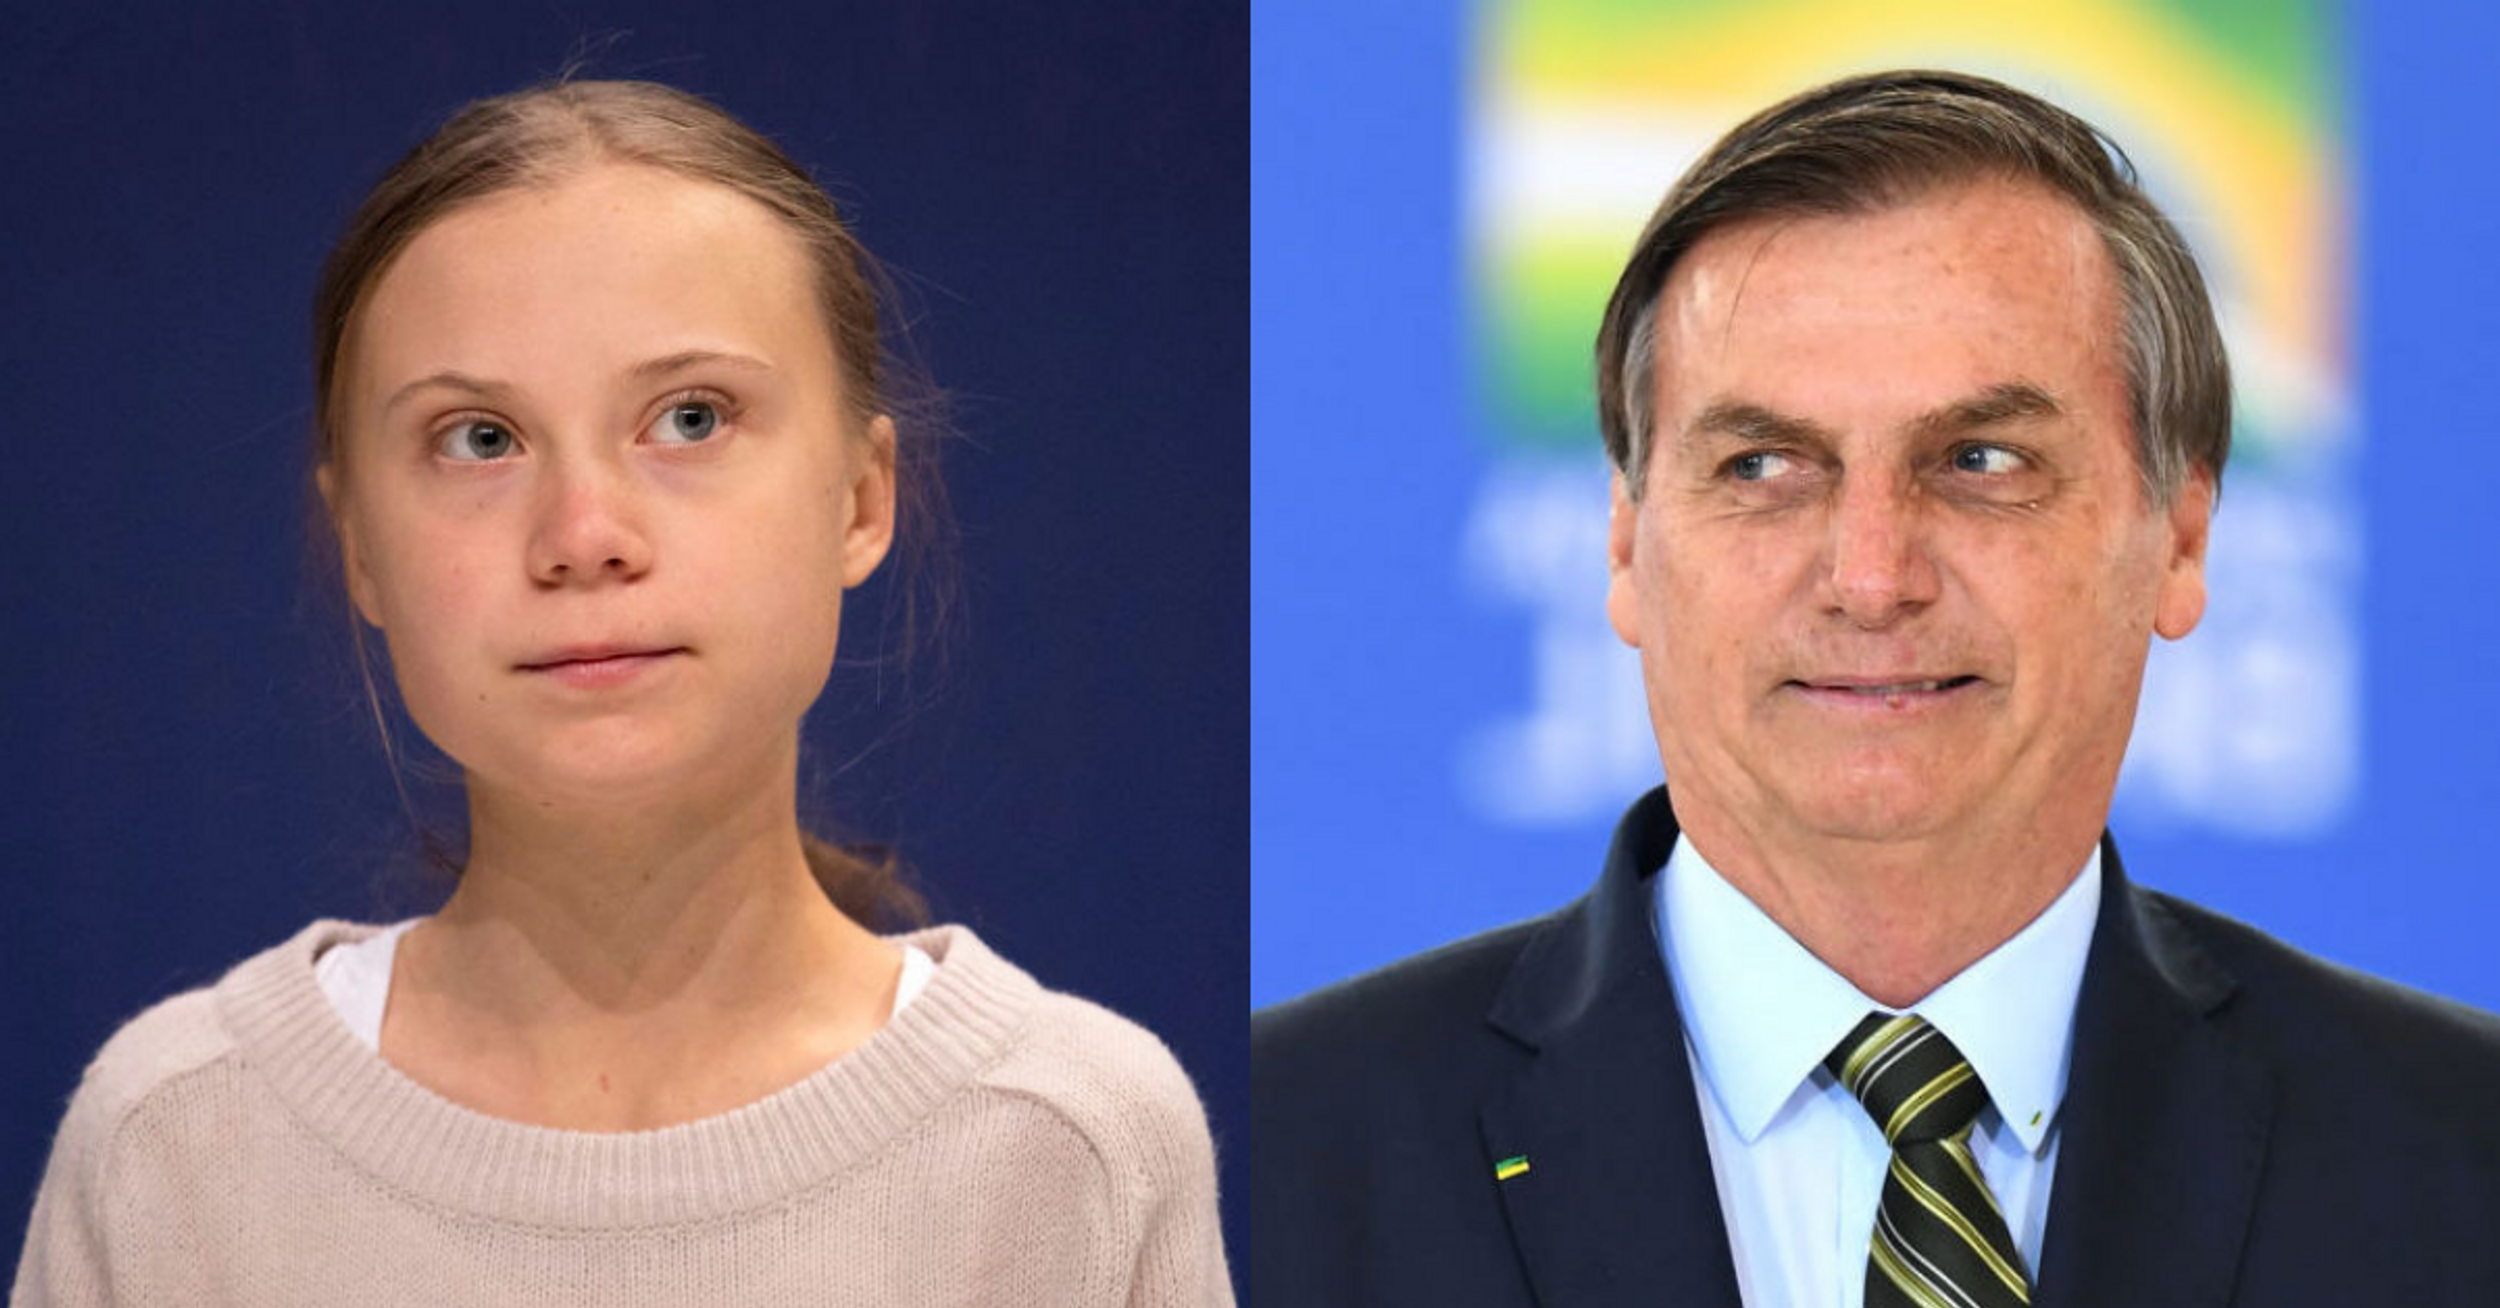 Brazil's President Called Greta Thunberg a 'Brat' and Her Response Has People Cheering